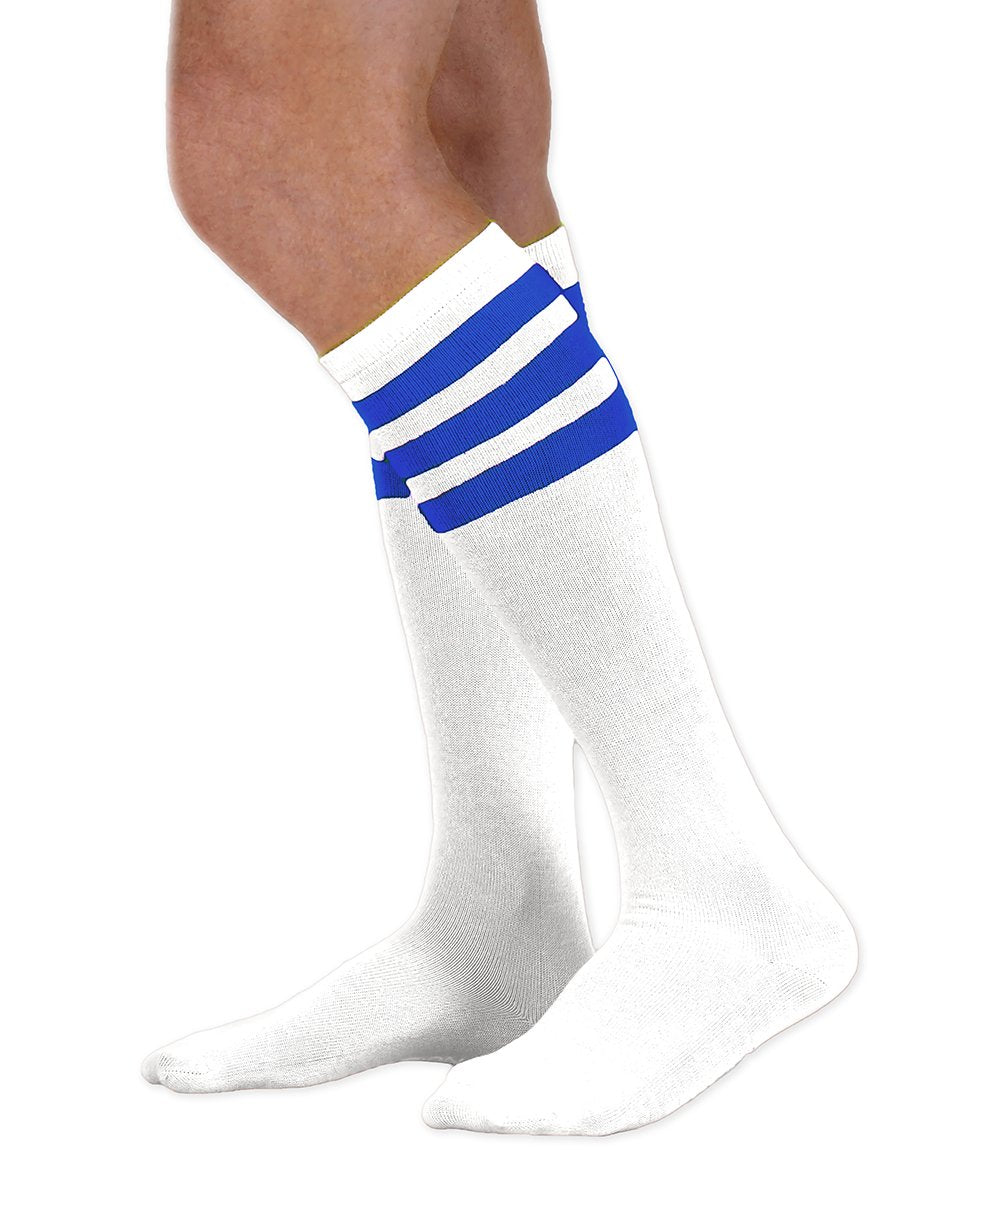 Unisex adult size white knee high tube sock with three royal blue stripes